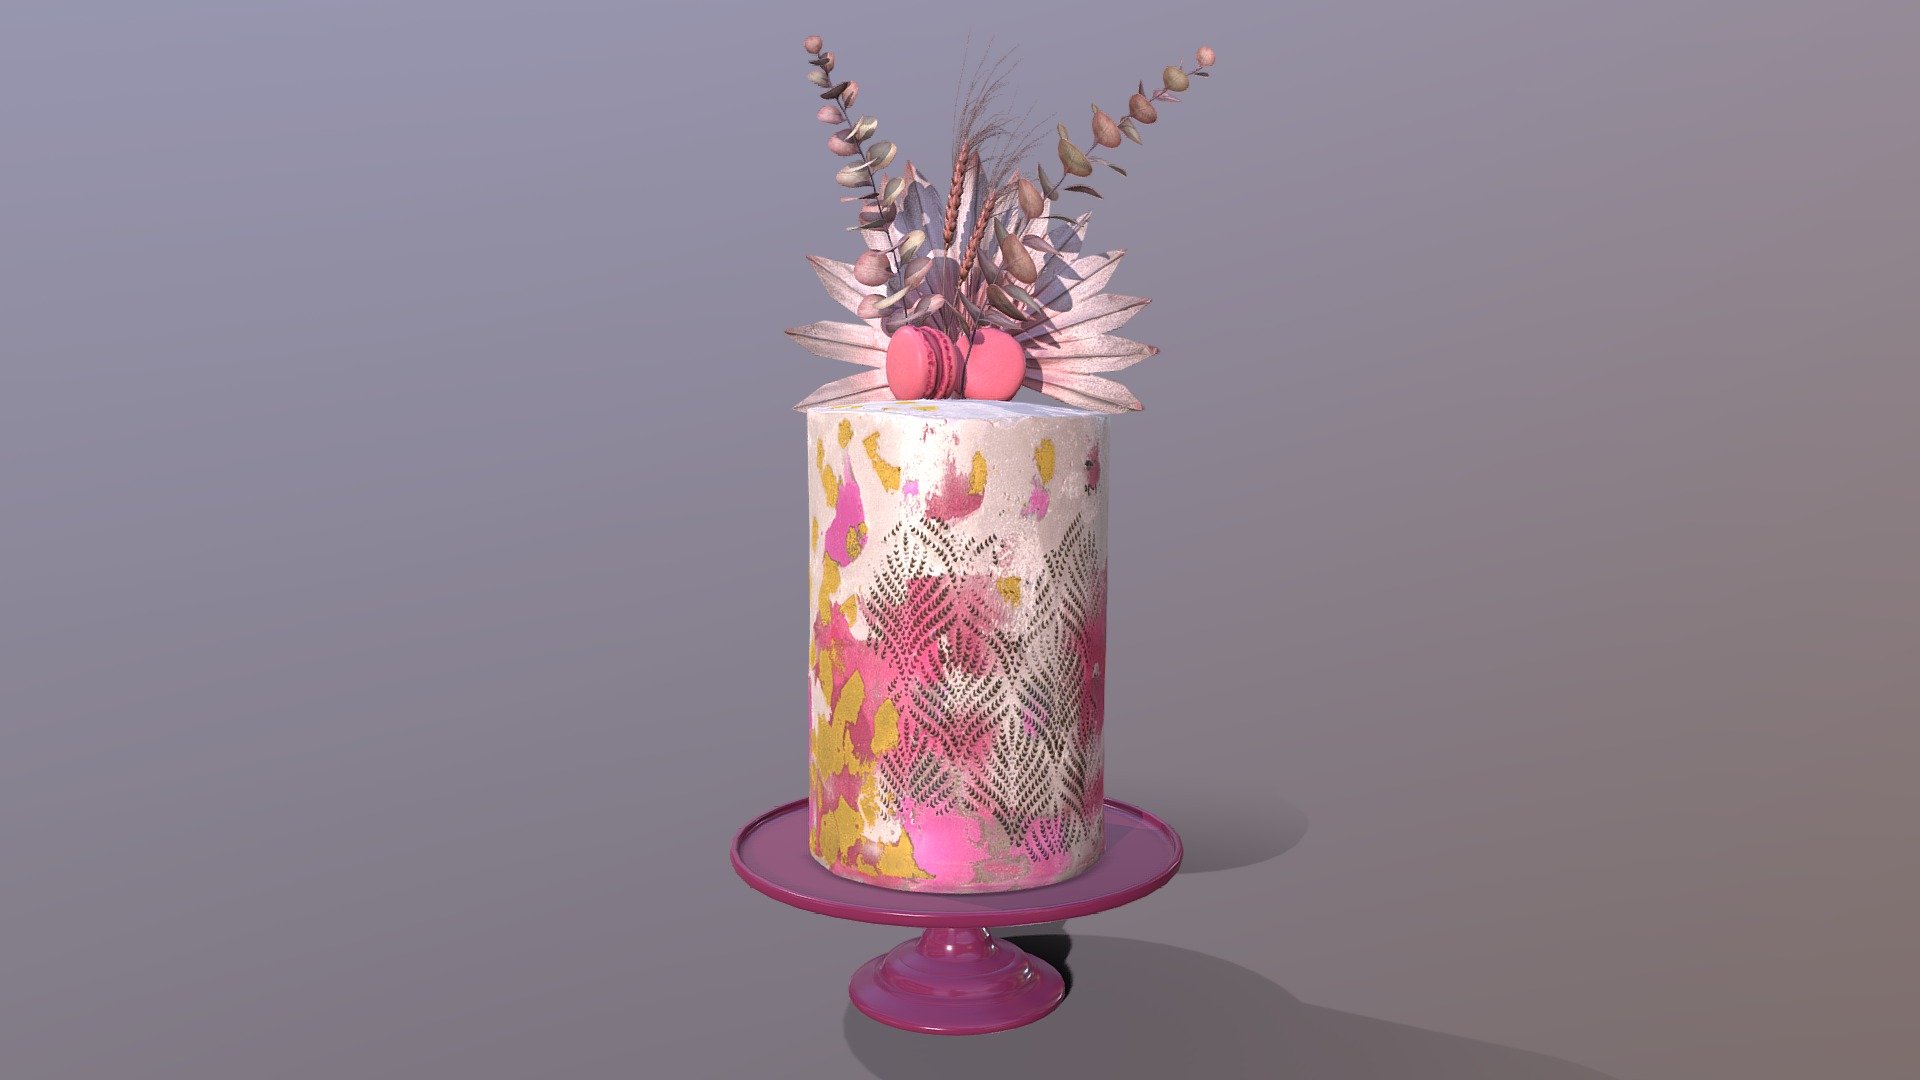 3D scan of a Luxury Golden Pink Buttercream Cake on the elegant mosser stand which is made by CAKESBURG Online Premium Cake Shop in UK.

This 3D cake can be personalised with any text and colour you want. Please contact us.

You can also order real cake from this link: https://cakesburg.co.uk/products/luxury-buttercream-cake-06?_pos=1&amp;_sid=27f107744&amp;_ss=r

Cake Textures - 4096*4096px PBR photoscan-based materials (Base Color, Normal, Roughness, Specular, AO)

Macarone textures - 4096*4096px PBR photoscan-based materials (Base Color, Normal, Roughness, Specular, AO)

Palm, Eucalyptus and Wheat Textures - 4096*4096px PBR photoscan-based materials (Base Color, Normal, Roughness, Specular, AO) - Luxury Golden Pink Buttercream Cake - Buy Royalty Free 3D model by Cakesburg Premium 3D Cake Shop (@Viscom_Cakesburg) 3d model